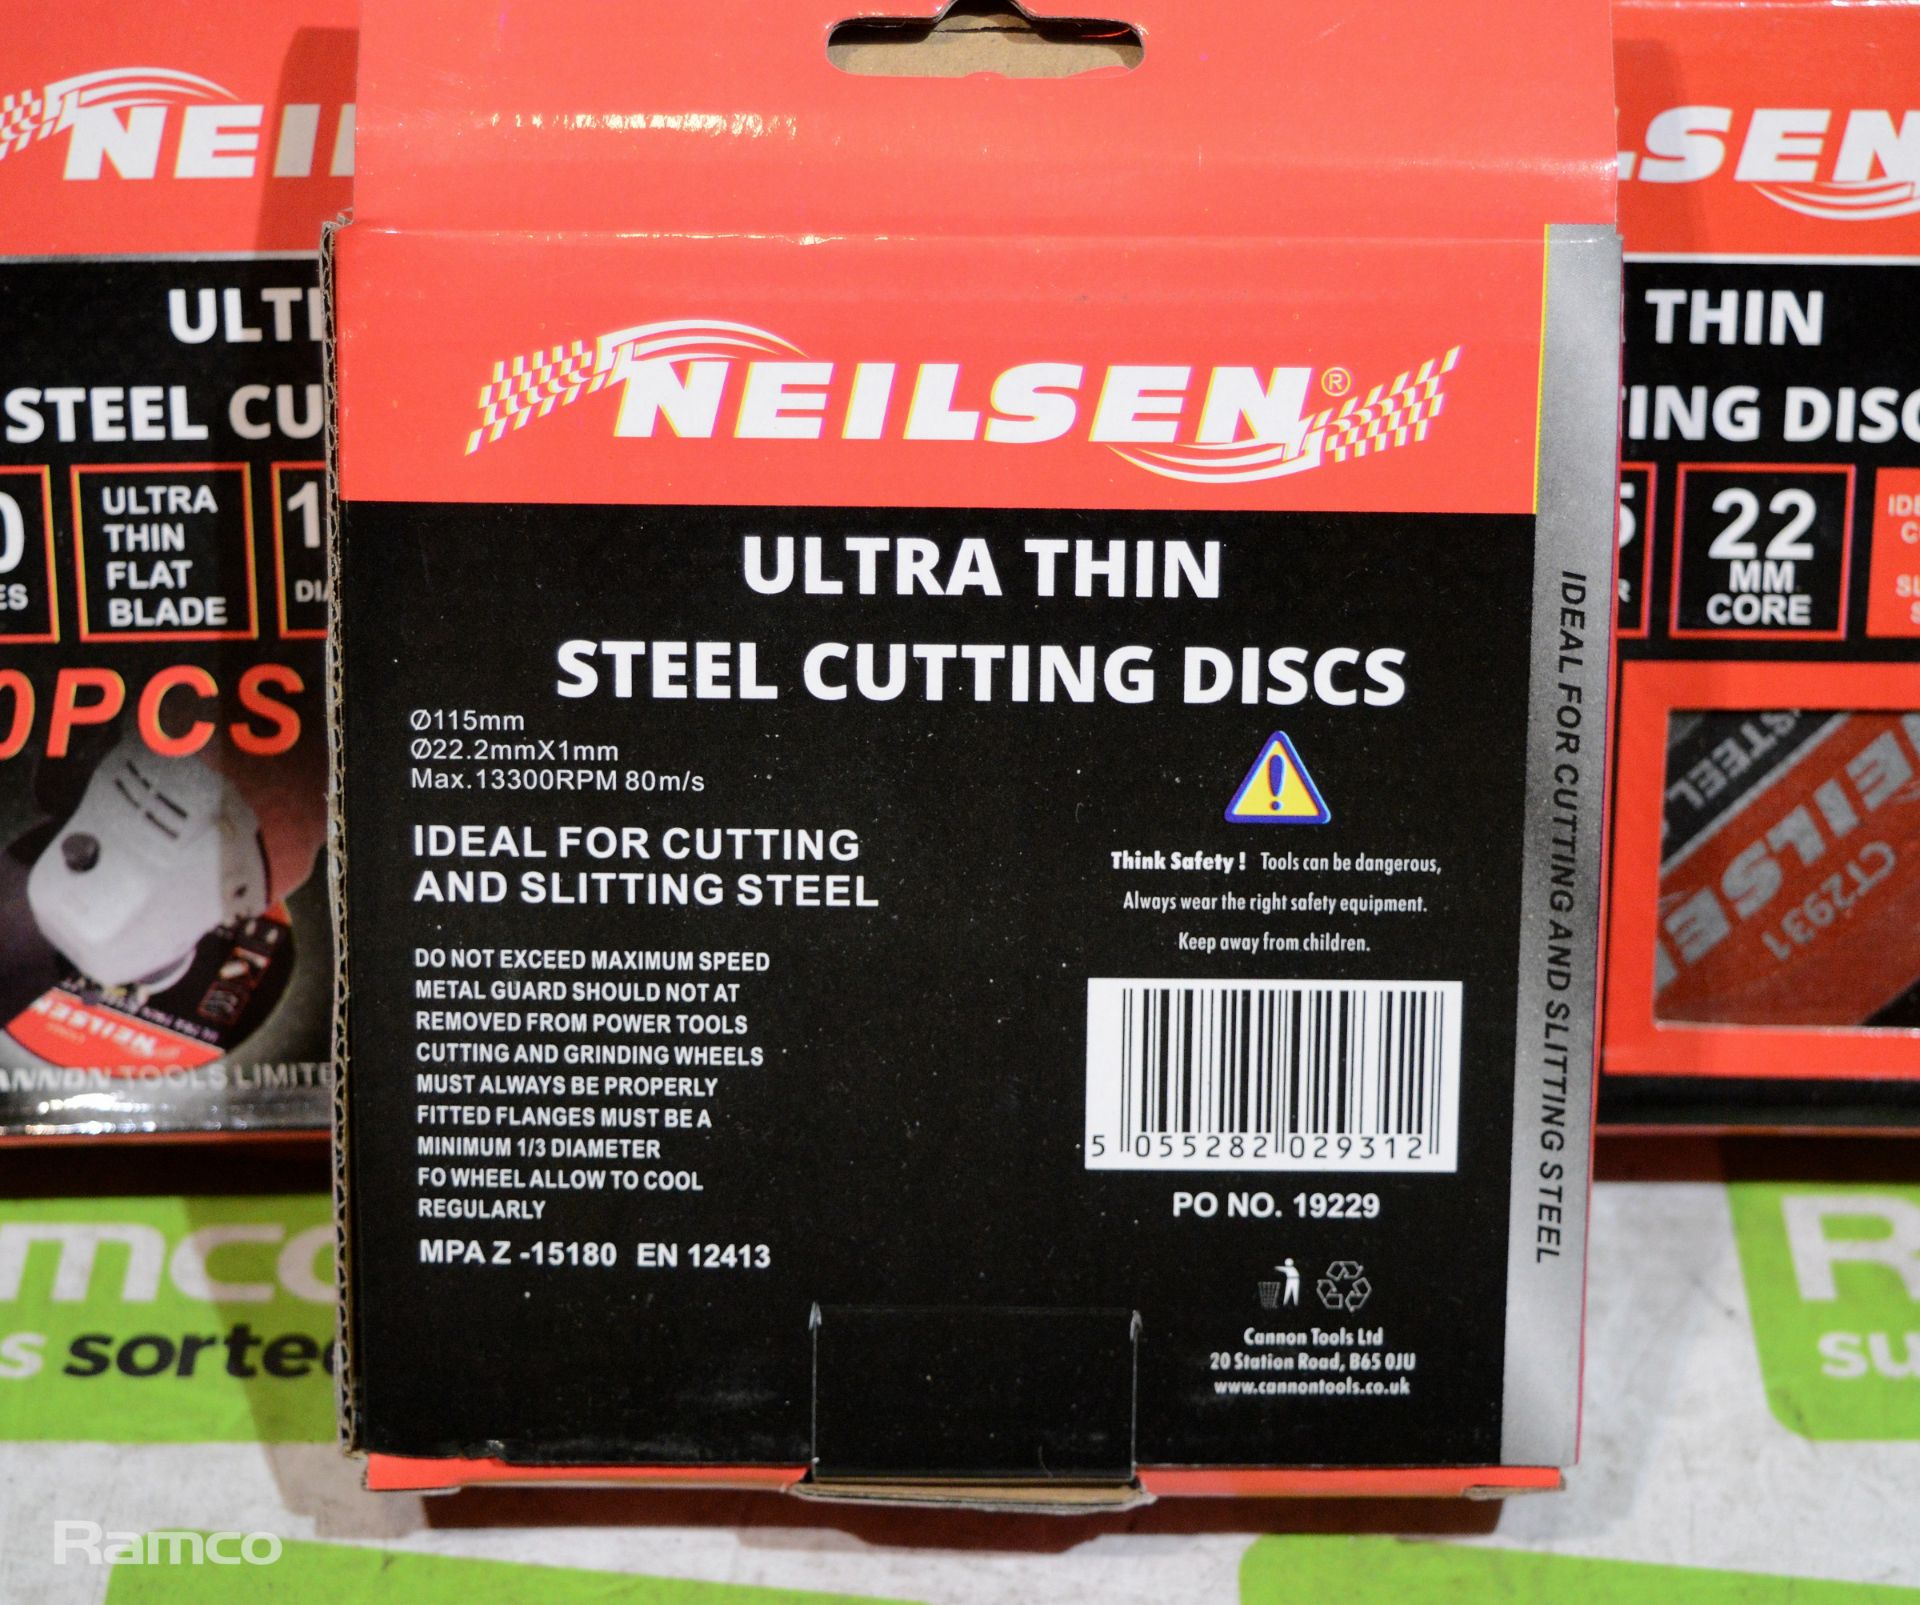 Neilsen Ultra thin steel cutting discs CT2931 - 115mm - 20mm core - 20 per box - 5 boxes - Image 2 of 2